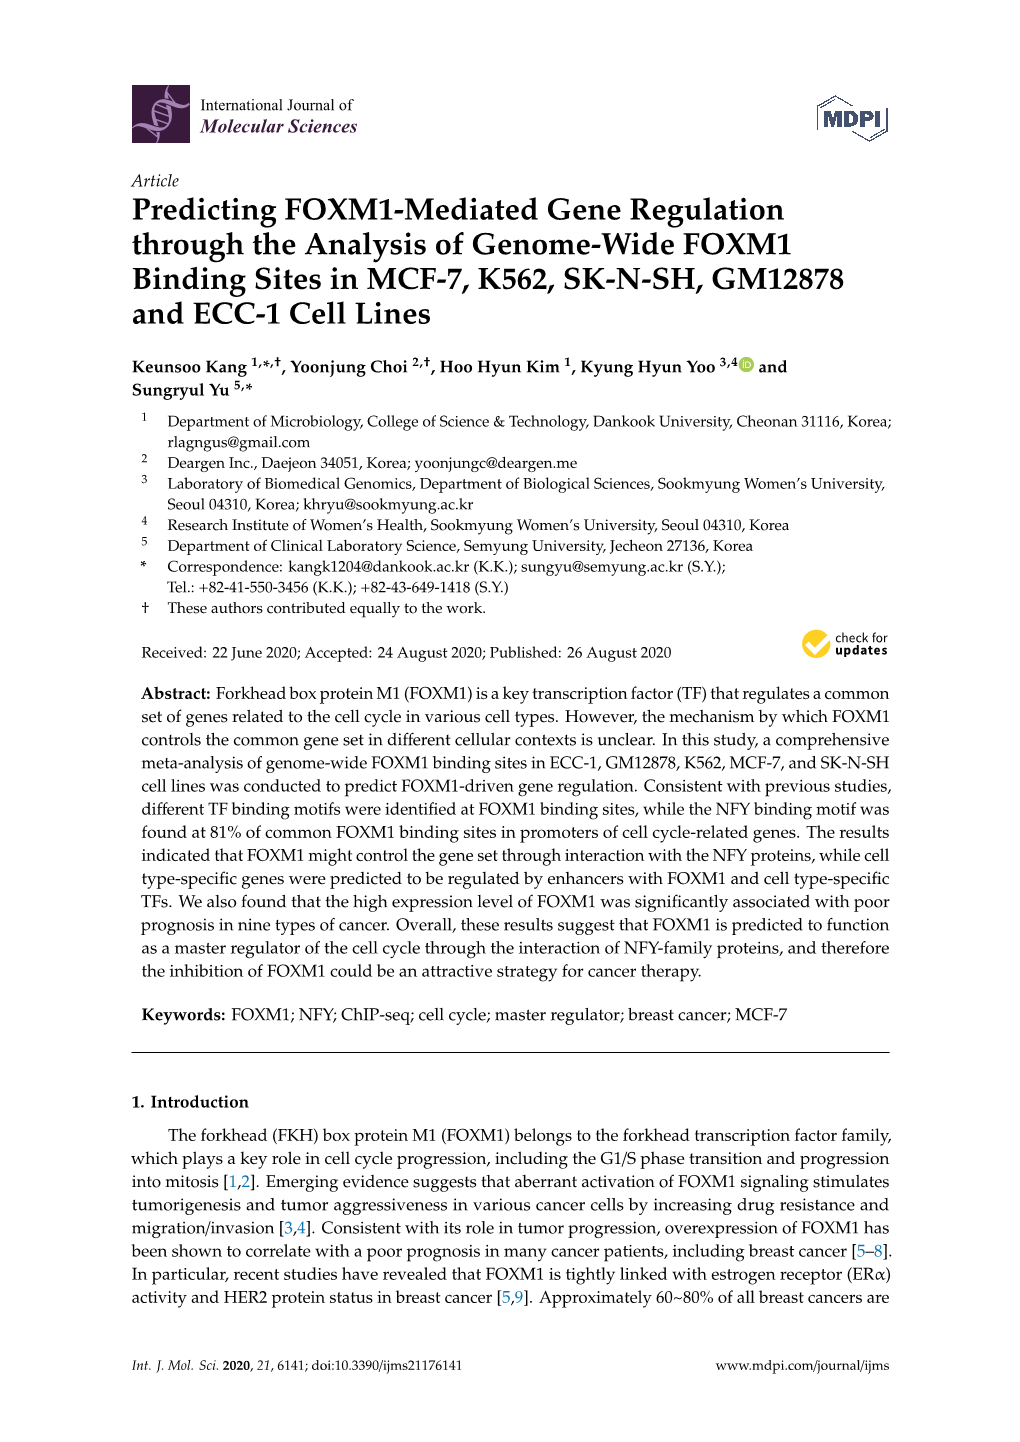 Predicting FOXM1-Mediated Gene Regulation Through the Analysis of Genome-Wide FOXM1 Binding Sites in MCF-7, K562, SK-N-SH, GM12878 and ECC-1 Cell Lines